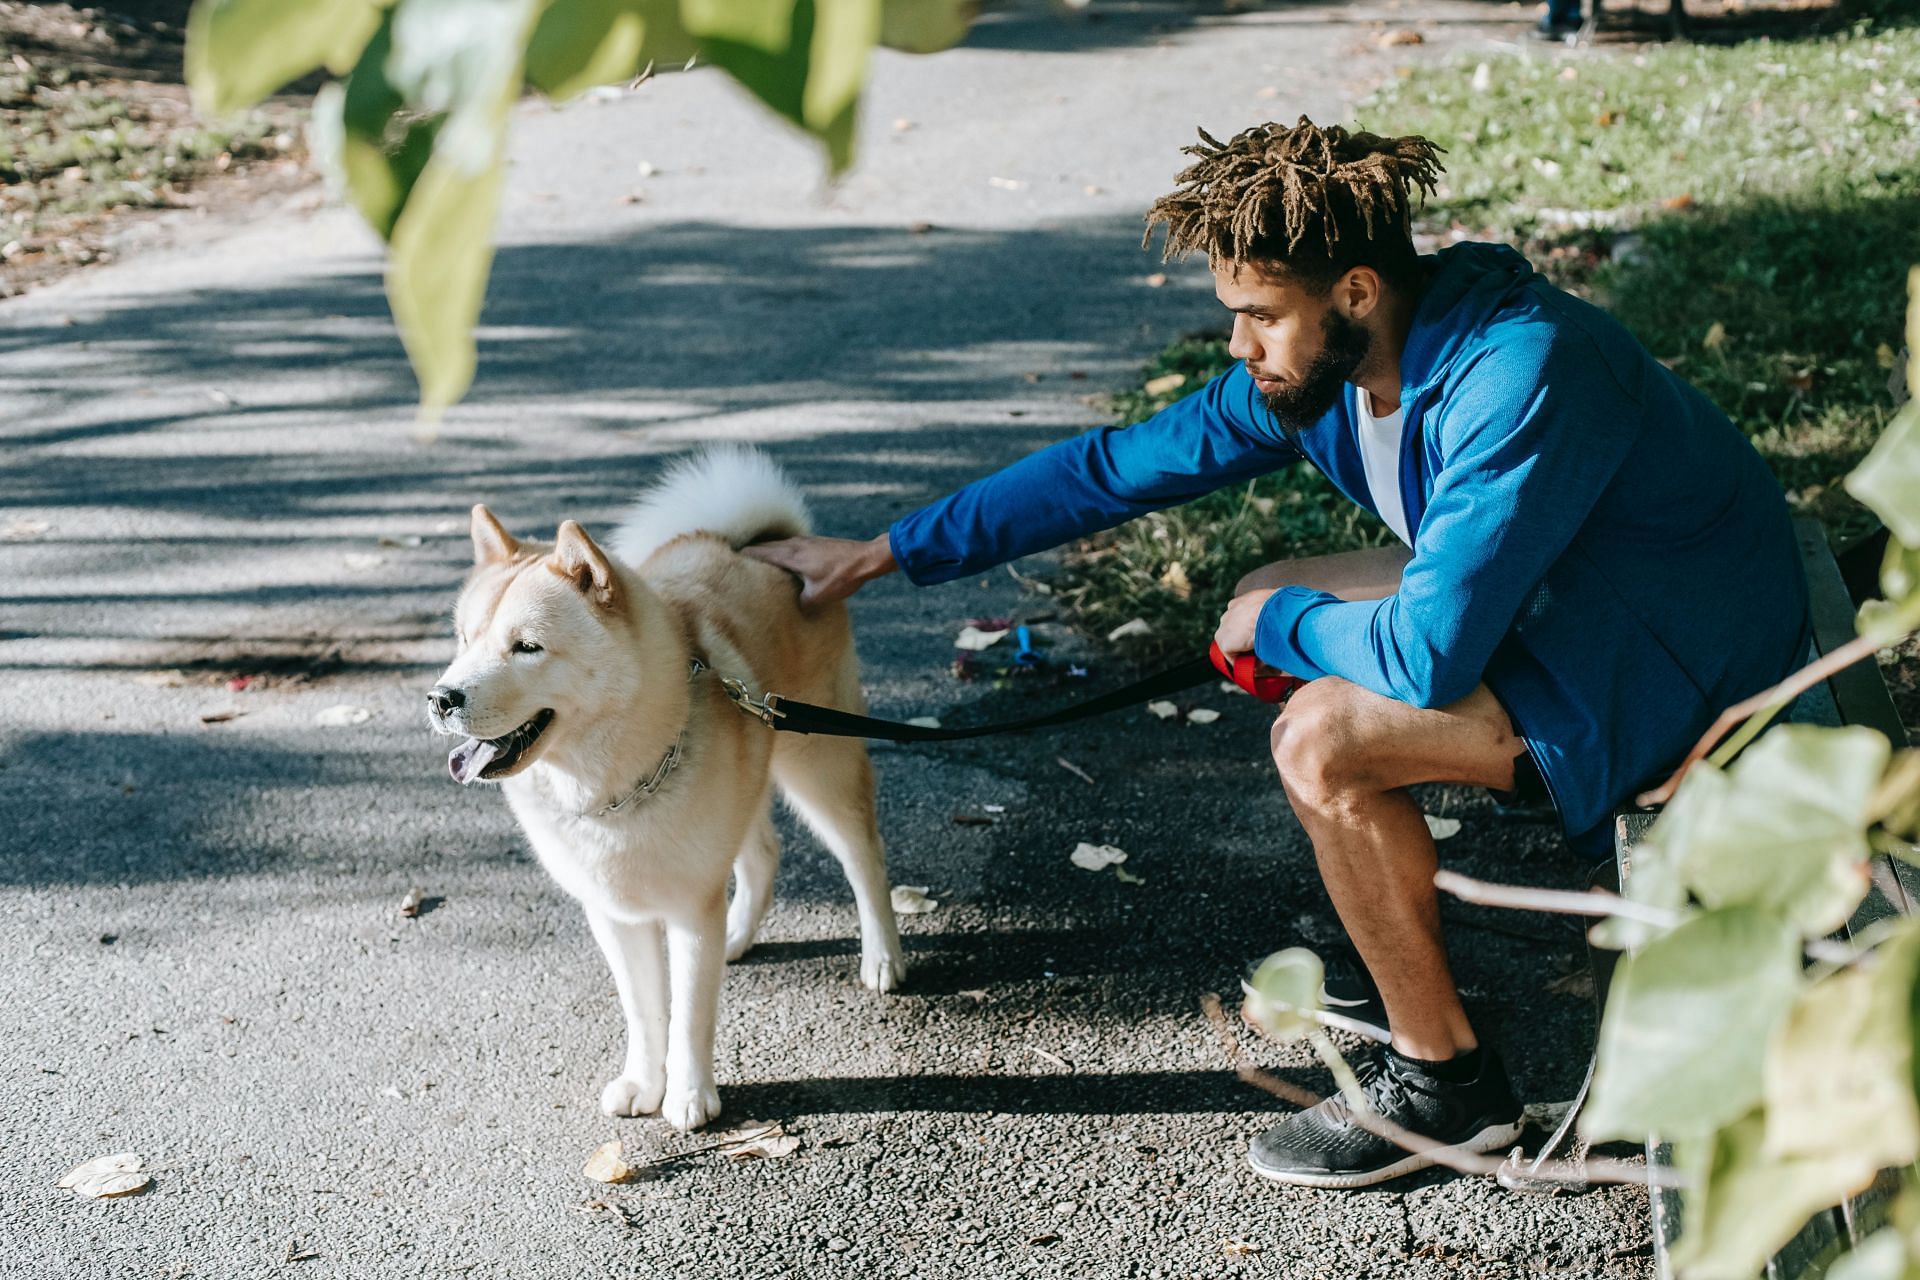 Workout with dog (Image via Pexels/Zen Chung)